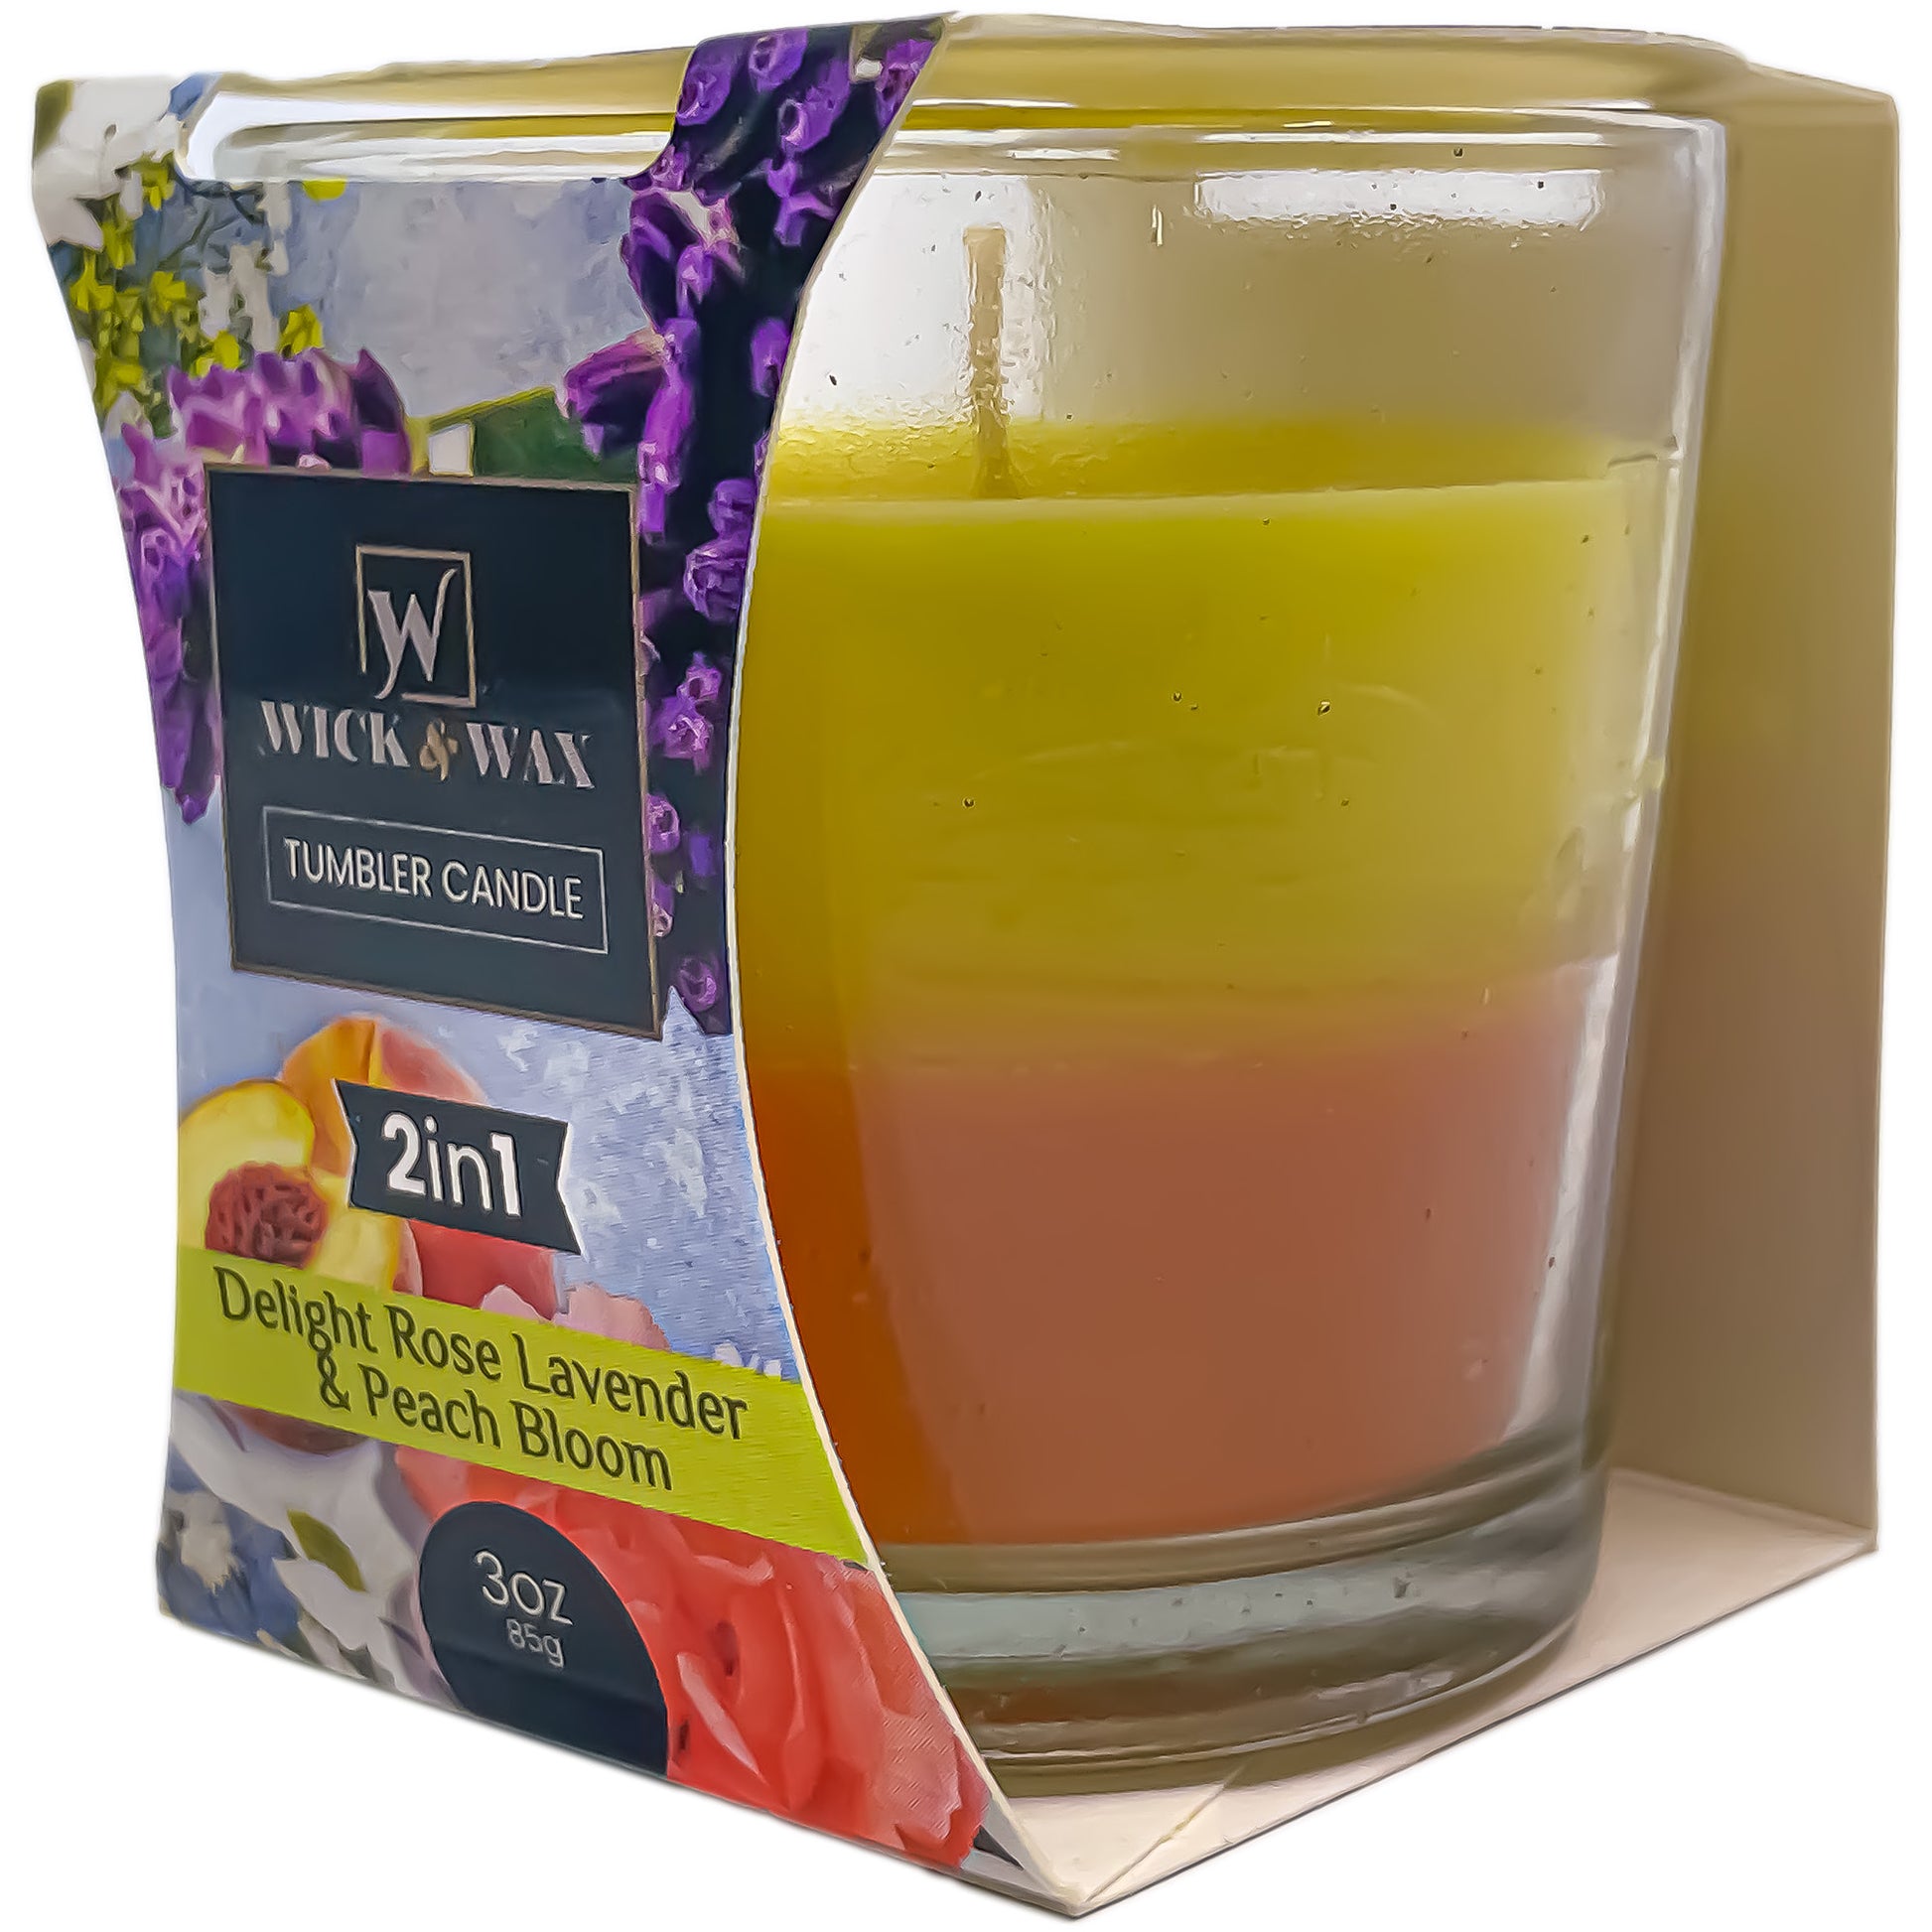 Rose Lavender Delight & Peach Blossom Double Scented Jar Candle - 3.5oz.  WICK & WAX   